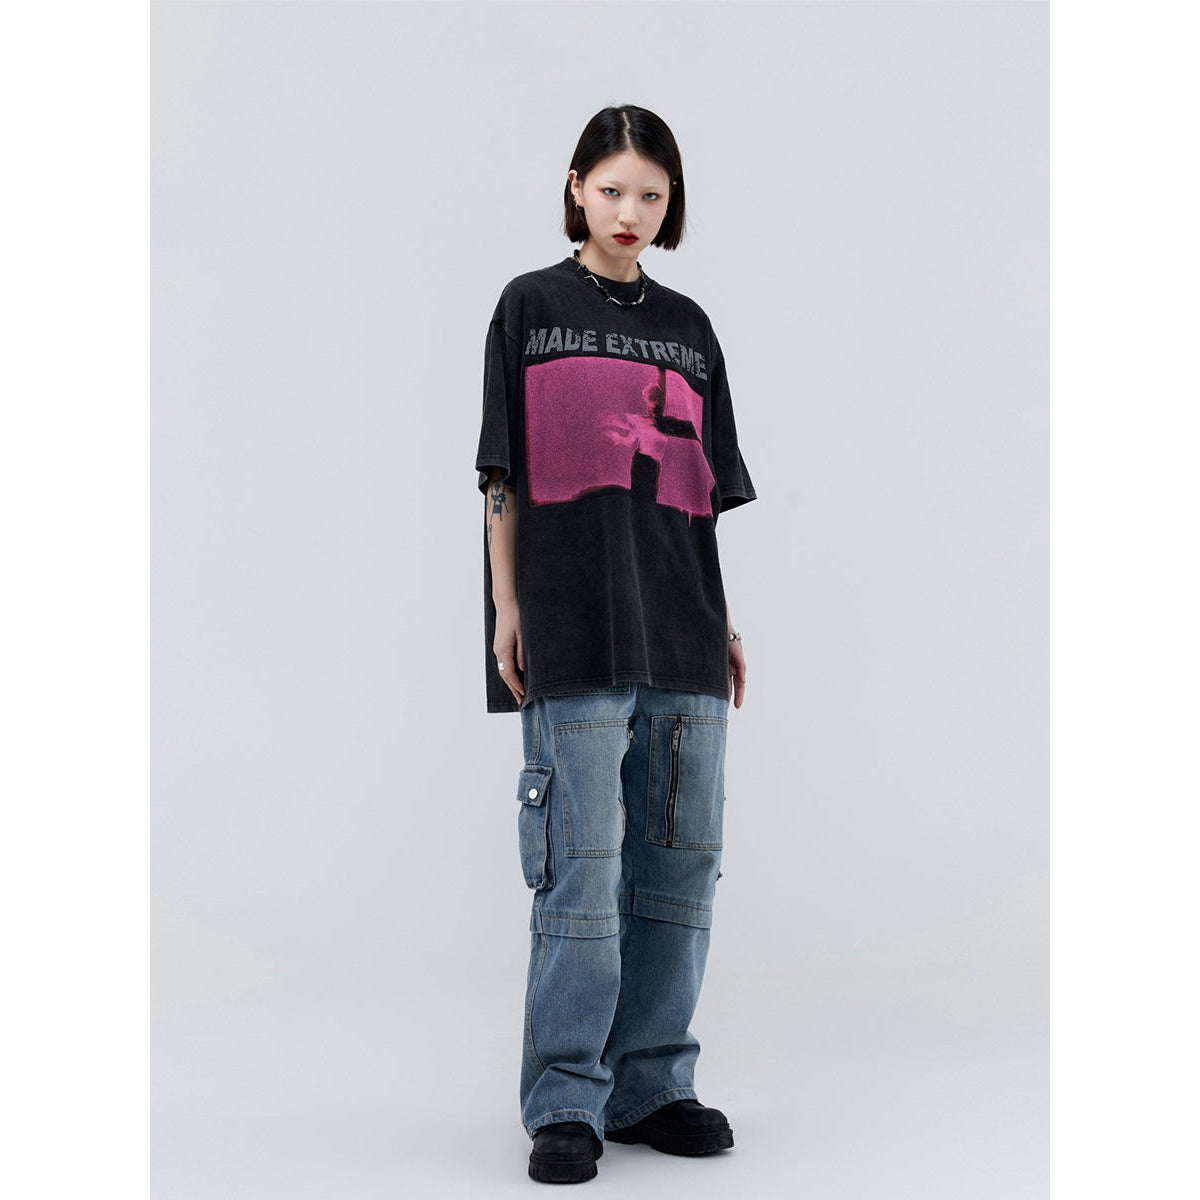 Figure Glitters T-Shirt Korean Street Fashion T-Shirt By Made Extreme Shop Online at OH Vault